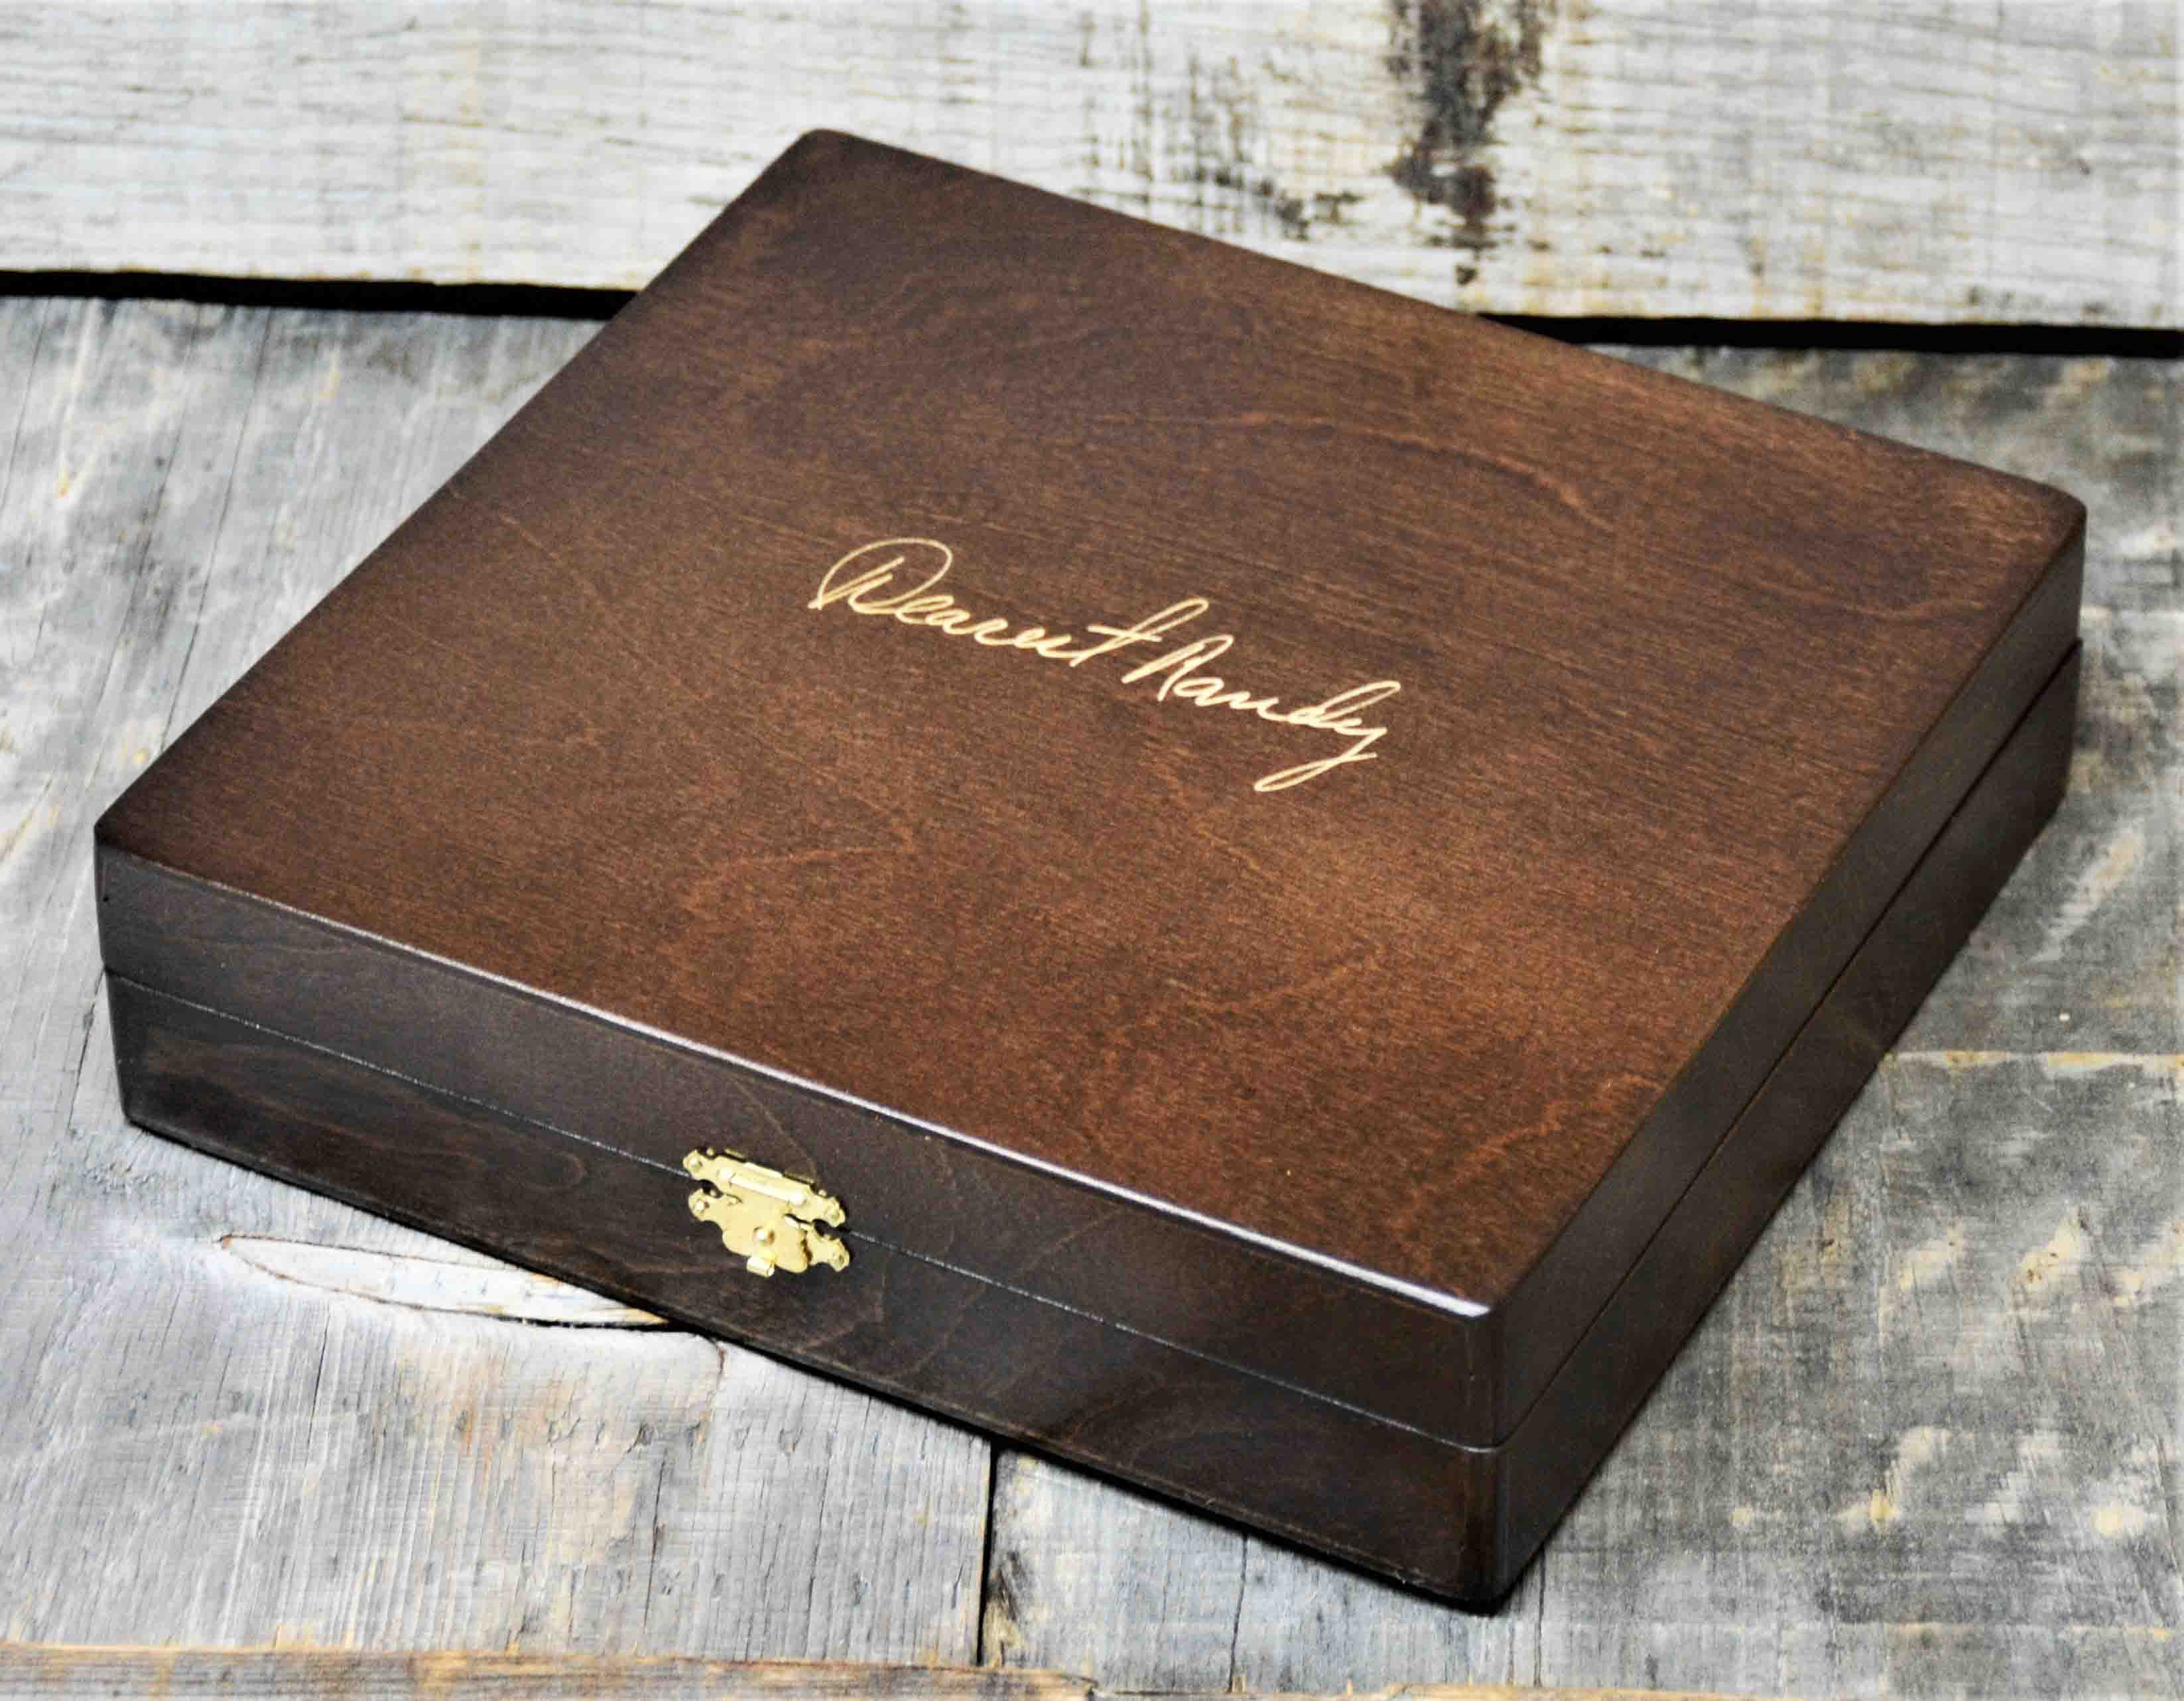 Handwriting Engraved into Premium Wooden Gift Box.